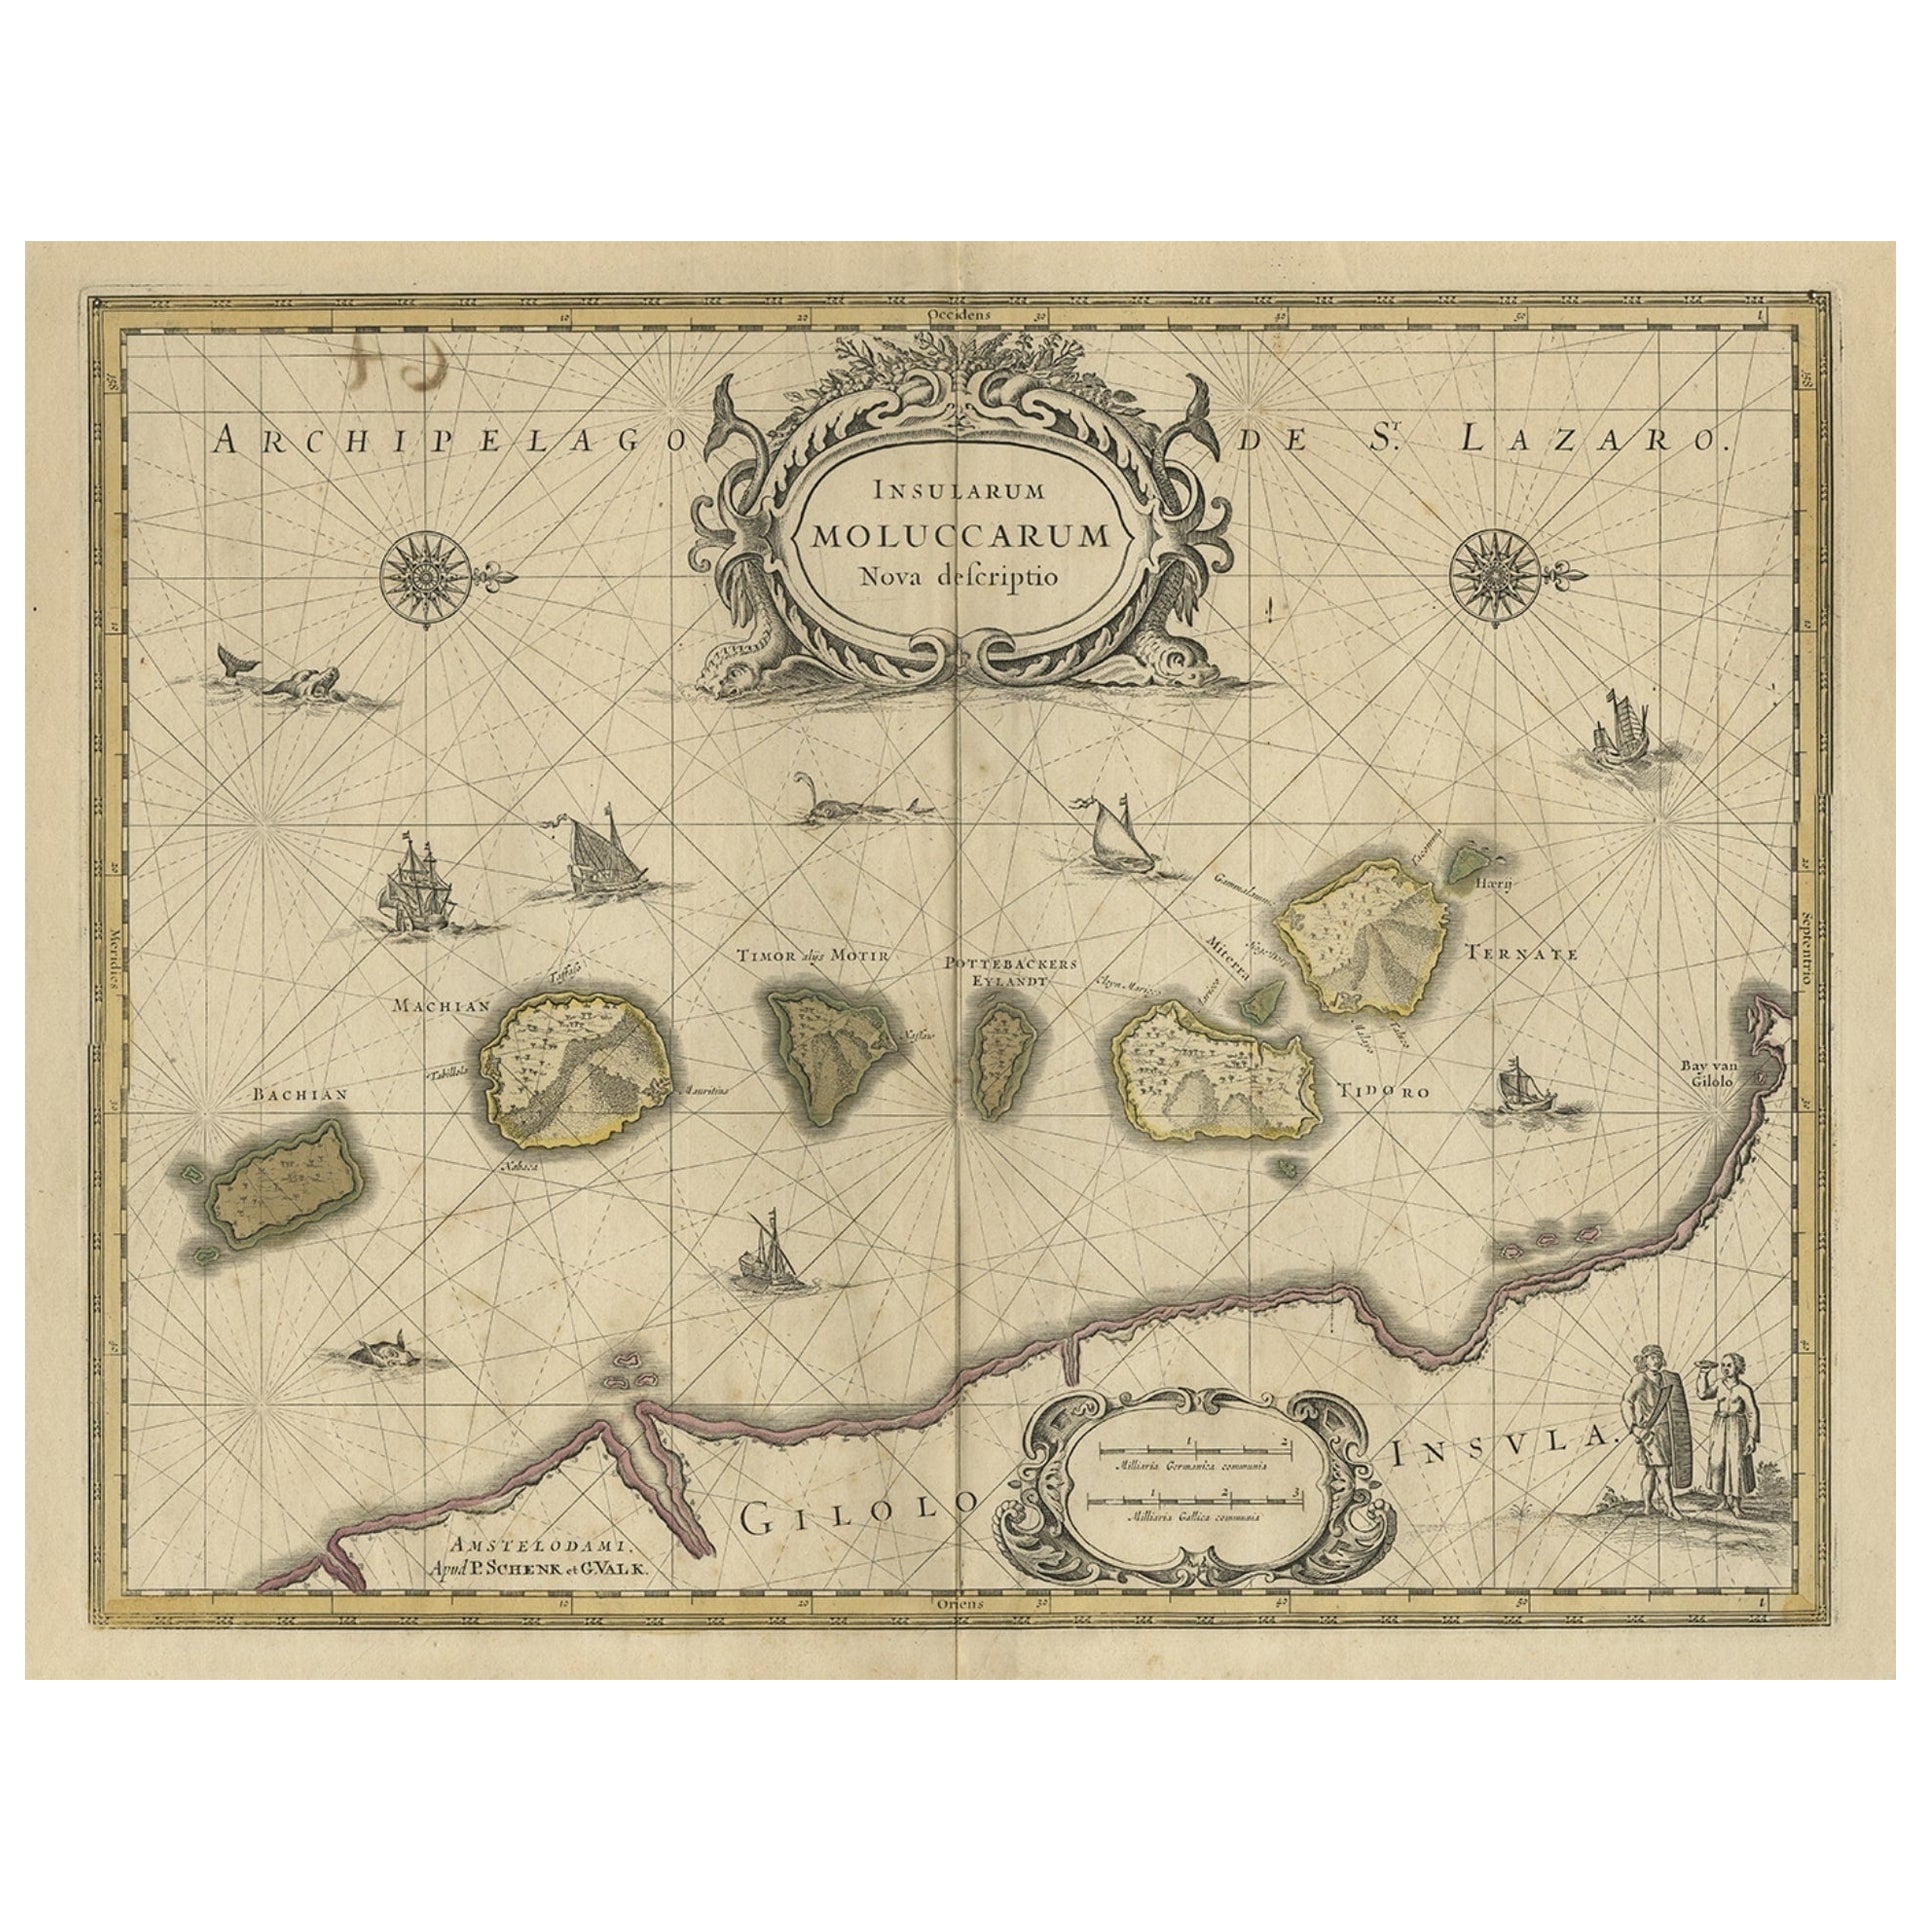 Old Map of the Moluccas, Known as the Famous Spice Islands, Indonesia, ca.1730